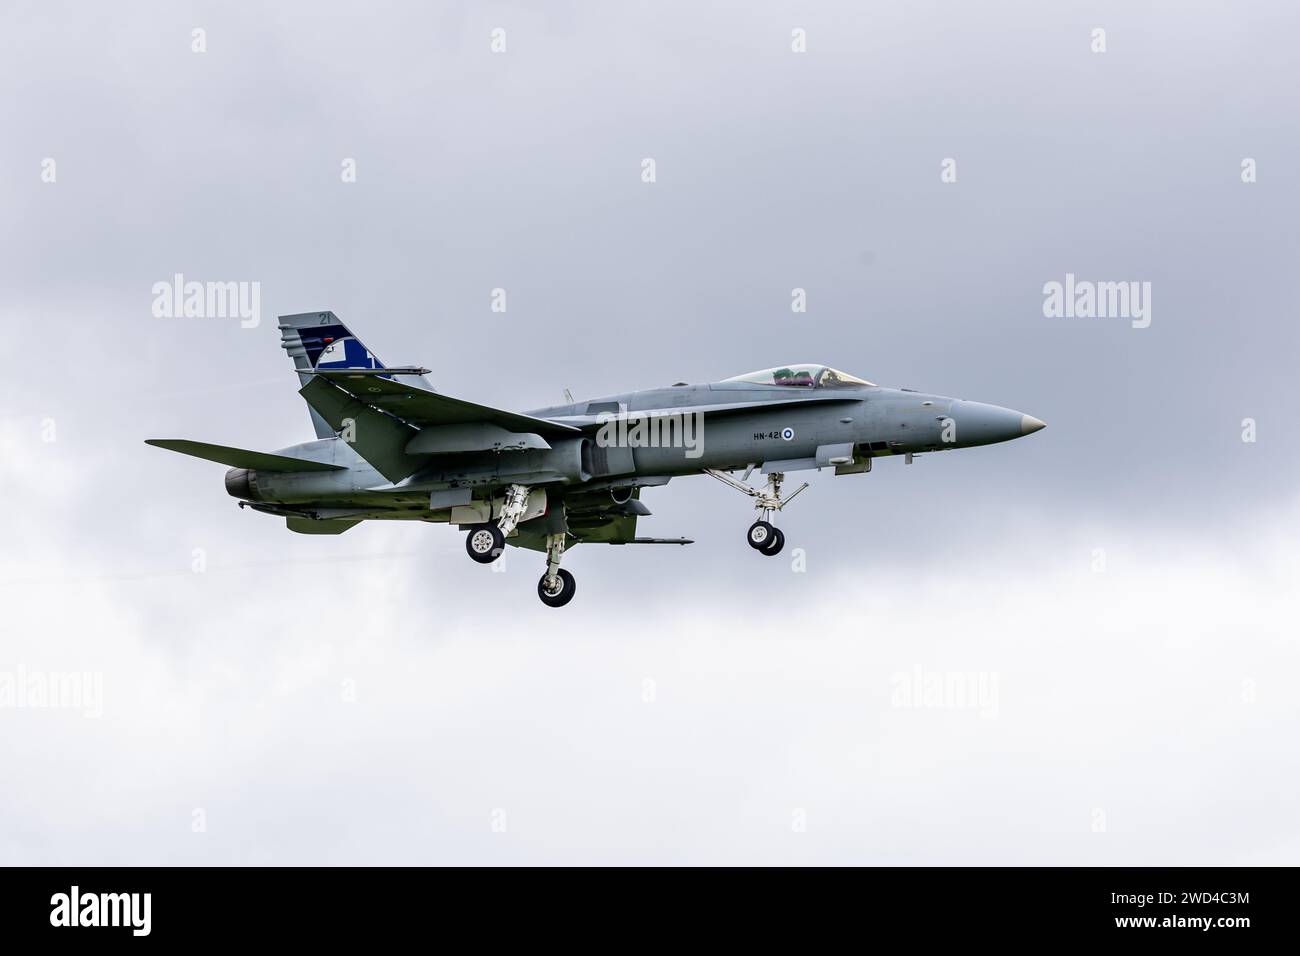 F18 McDonnell Douglas F/A-18C Operated by the Finnish air force - Fighter jet landing on runway with wheels deployed. Stock Photo